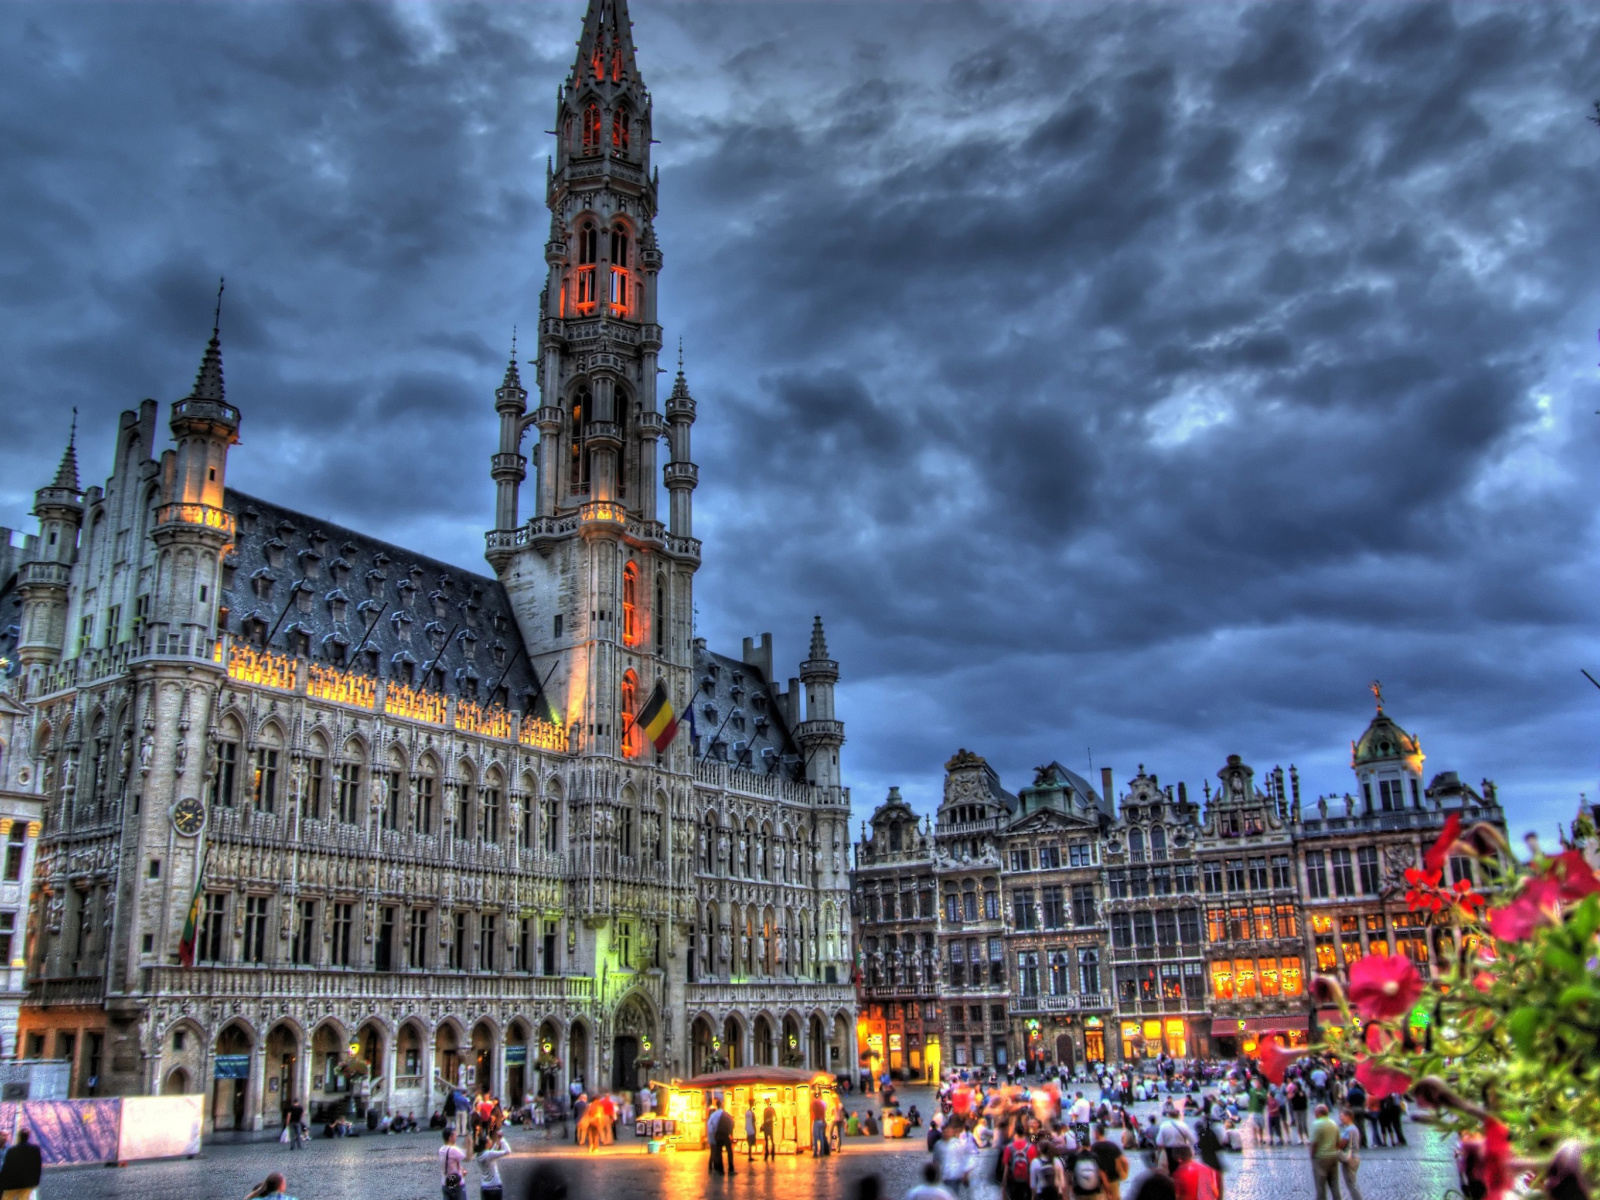 Brussels Grote Markt and Town Hall wallpaper 1600x1200